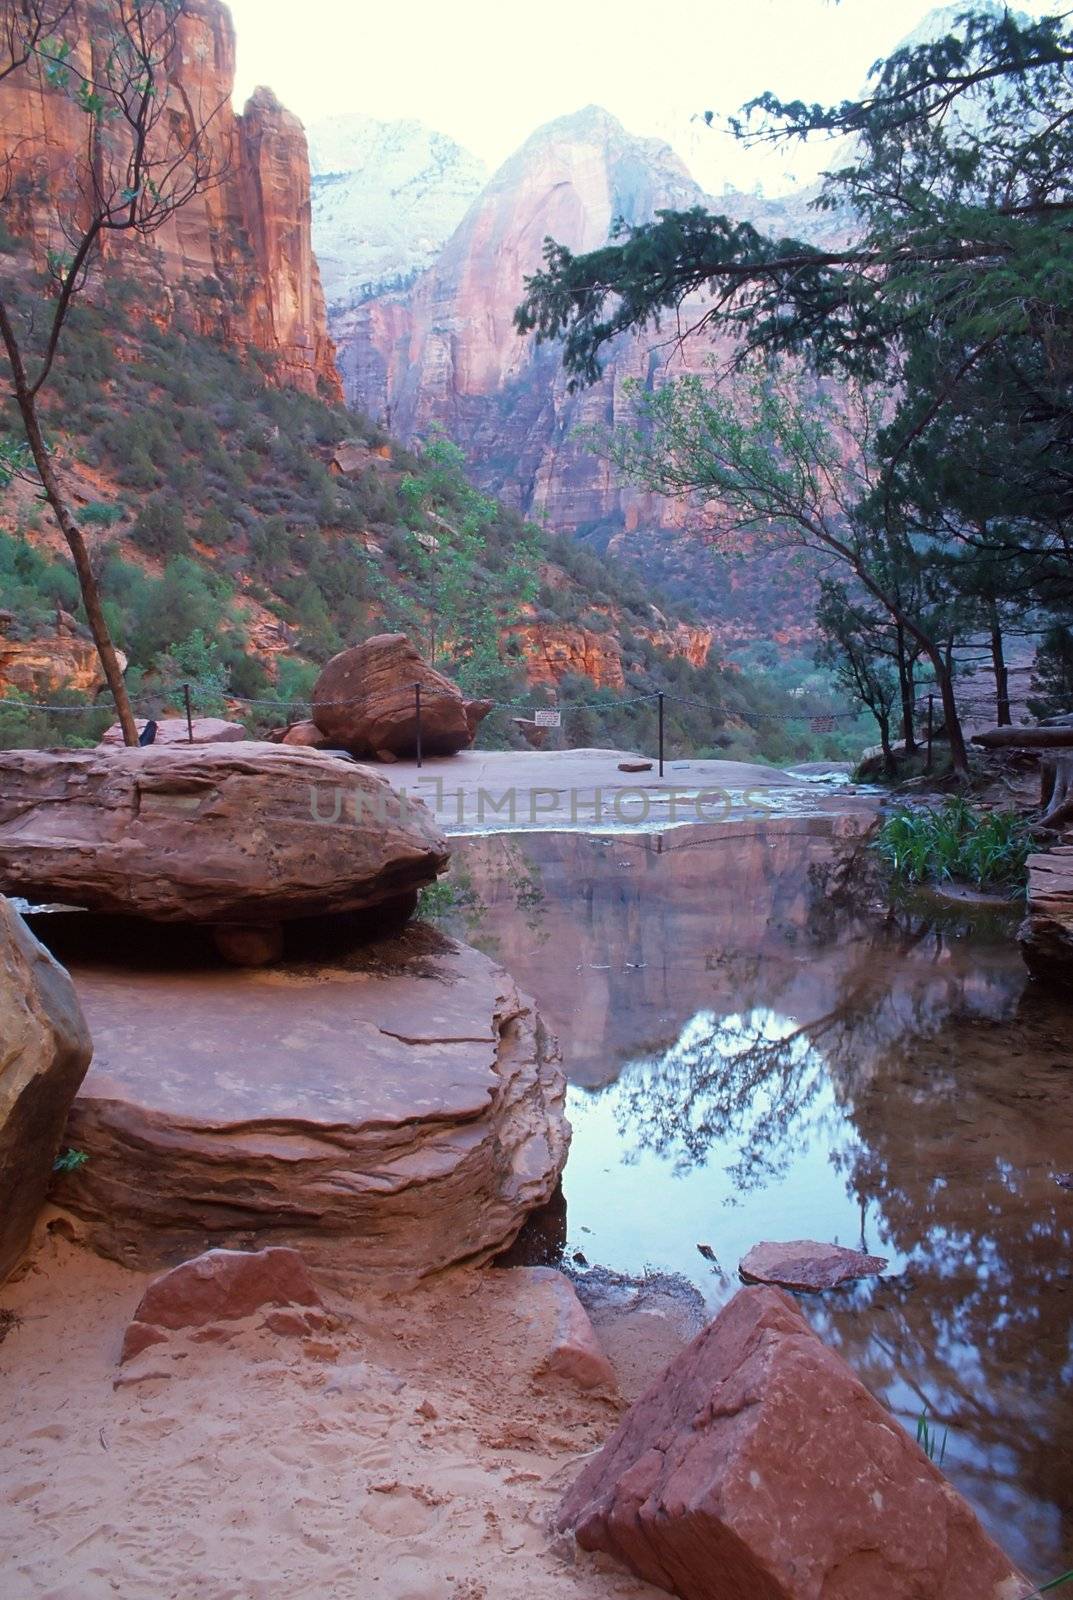 Zion National Park is a United States National Park located in the Southwestern United States, near Springdale, Utah.